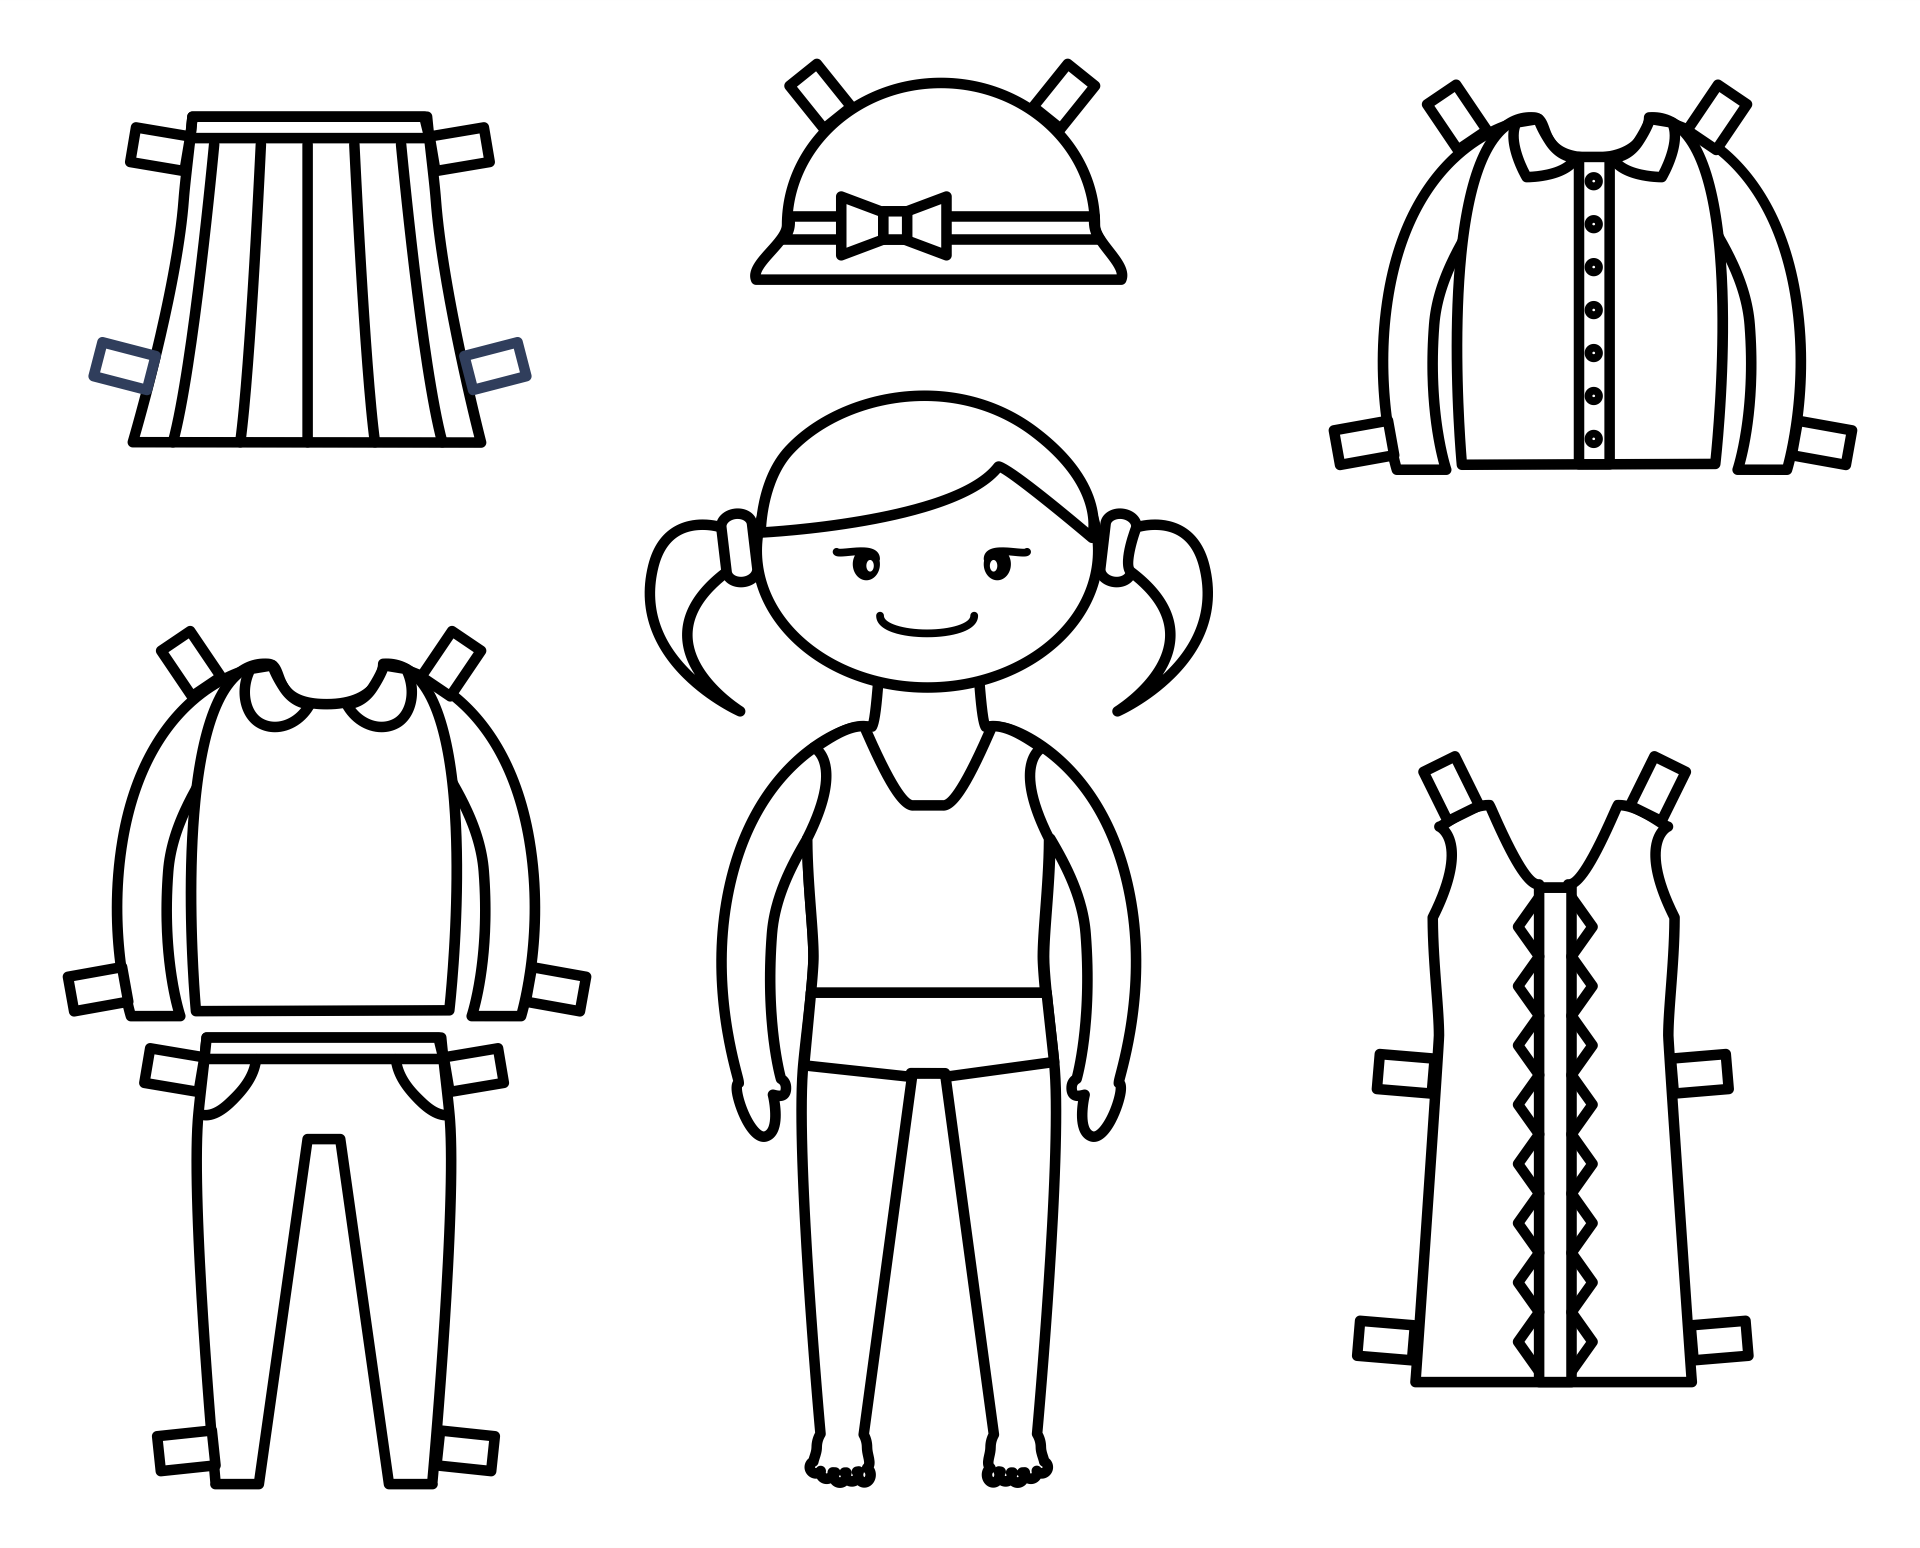 9-best-images-of-printable-paper-dolls-to-color-coloring-paper-dolls